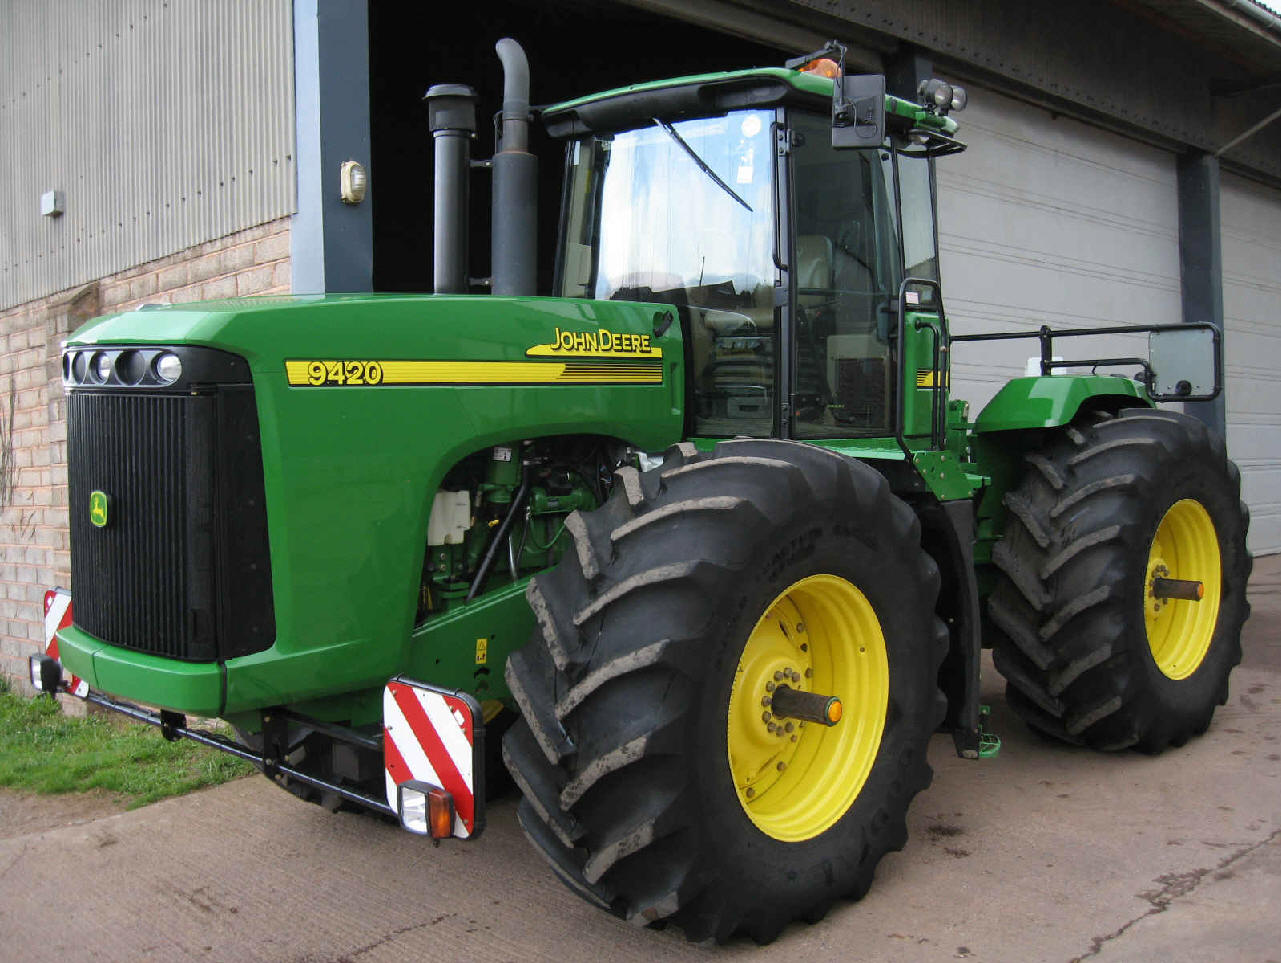 New 9420r tractor